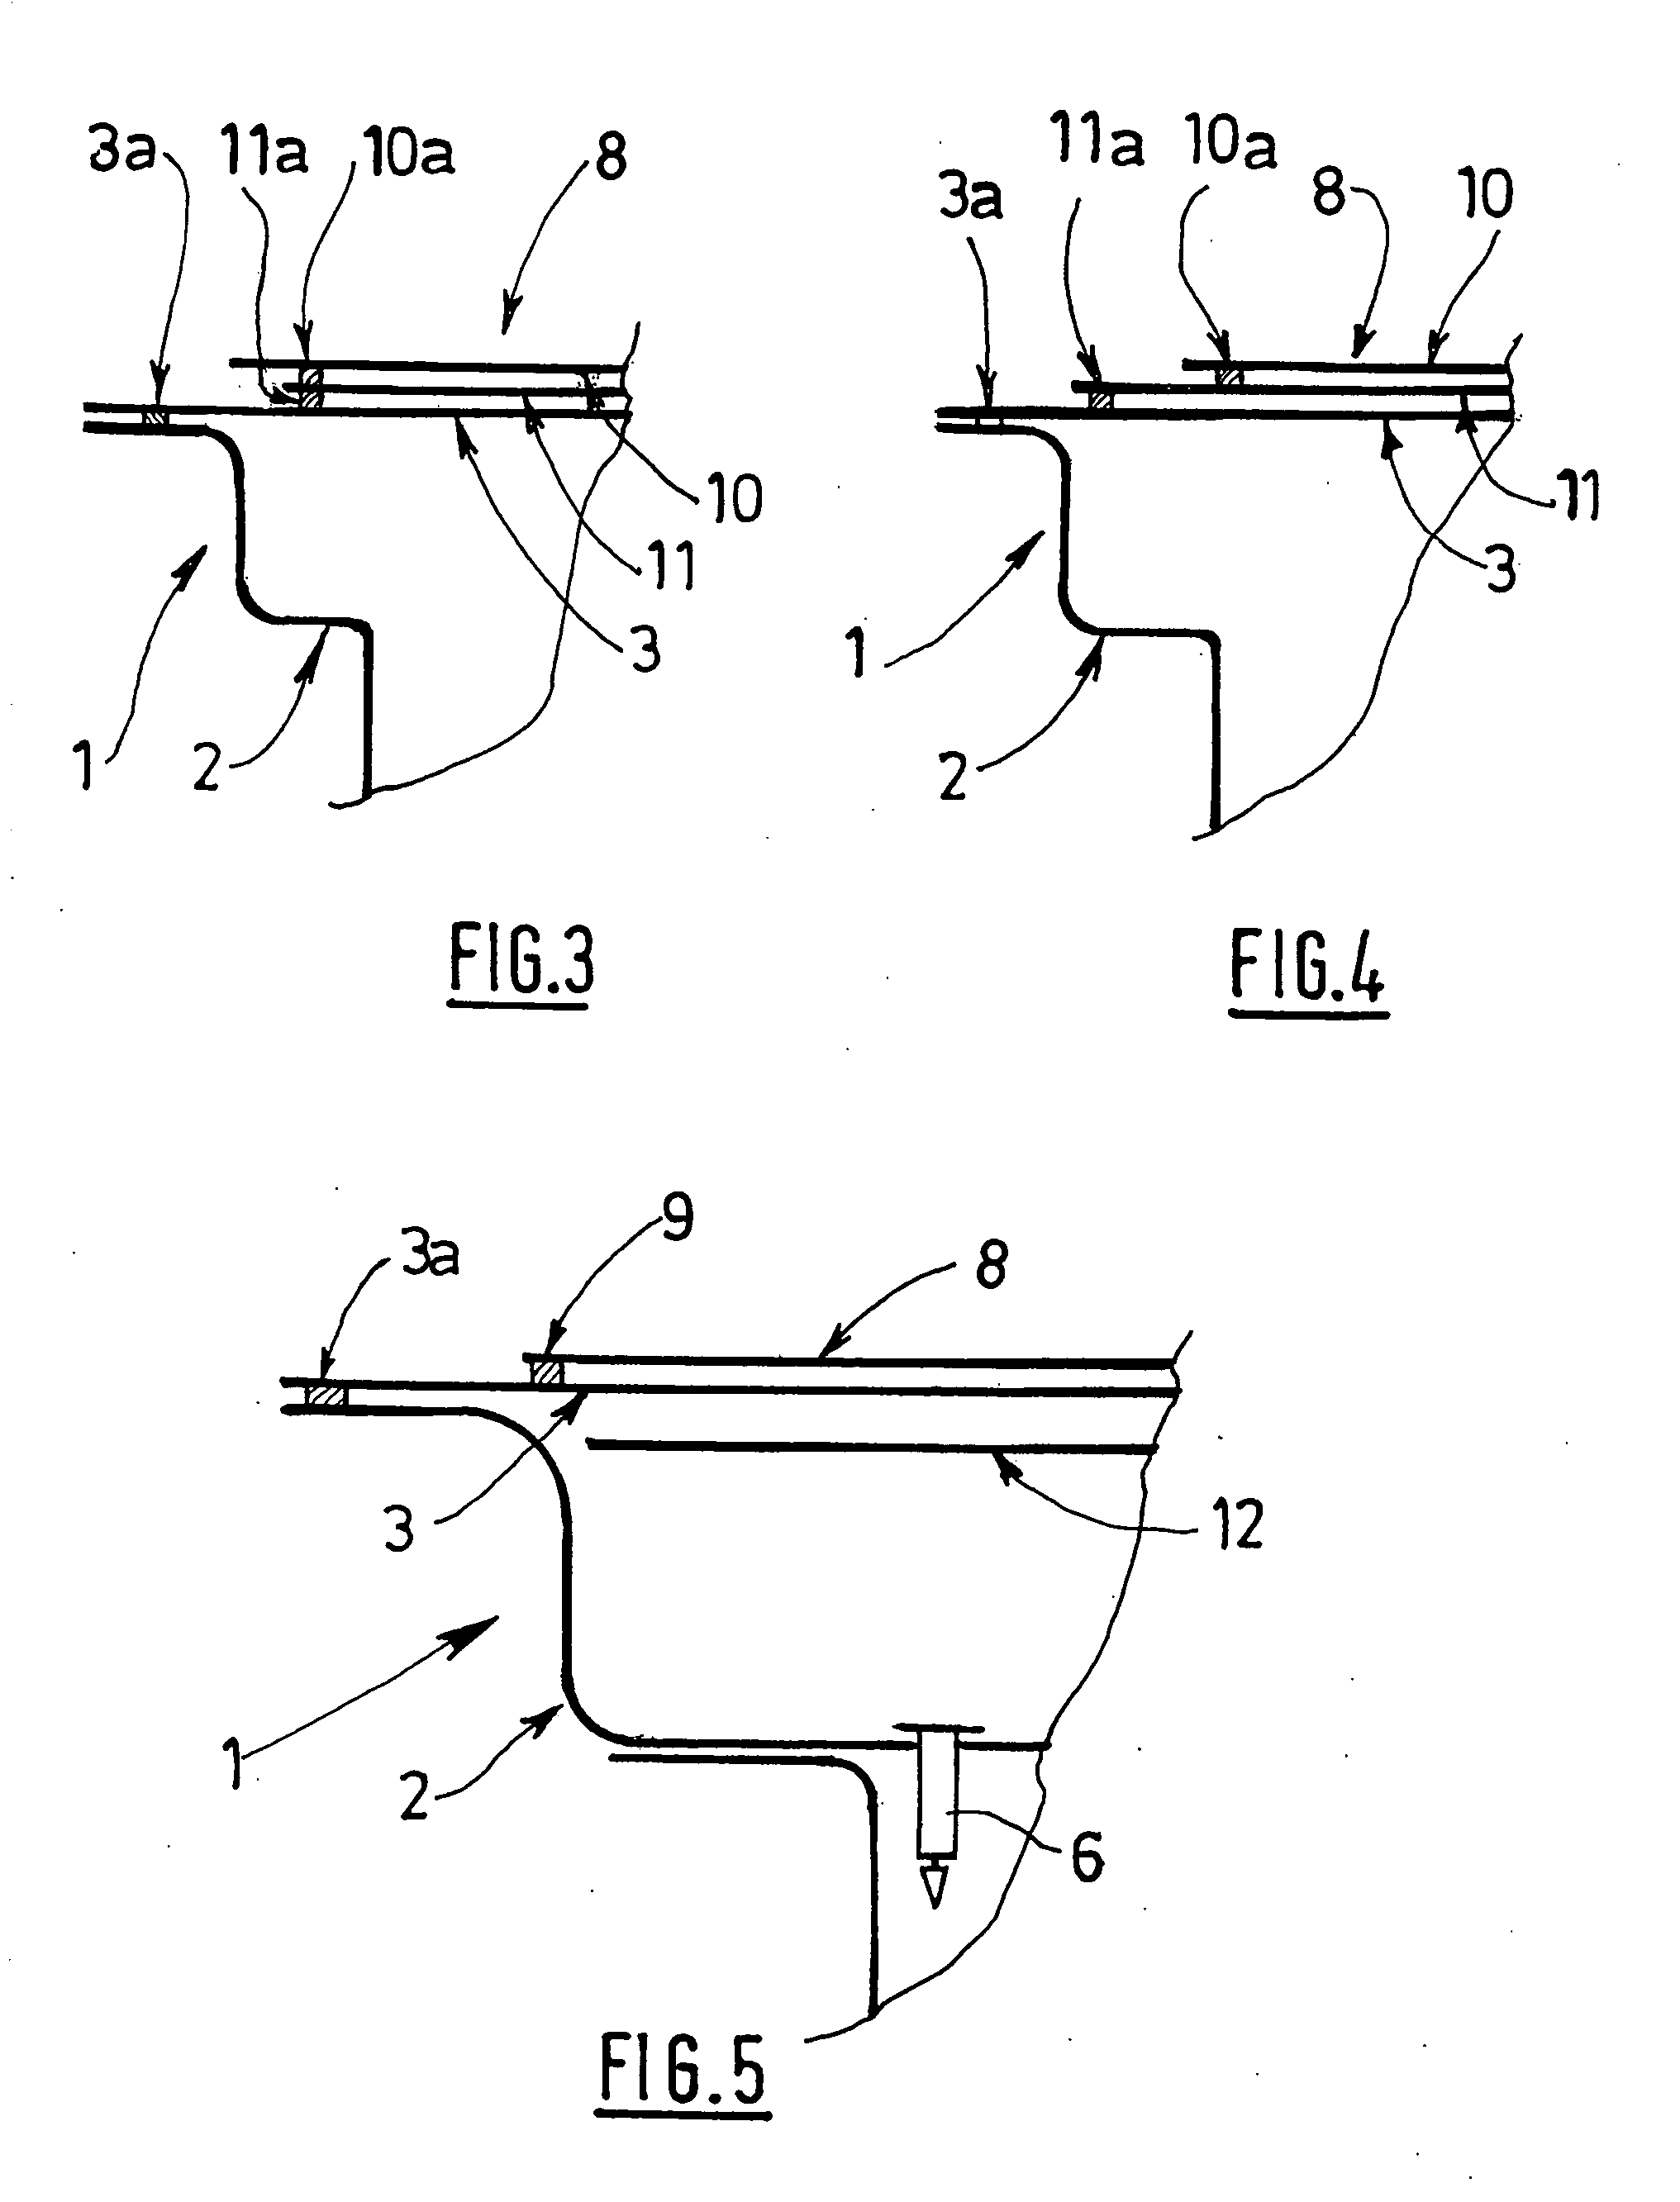 Packaging for products that is to be decontaminated by radiation